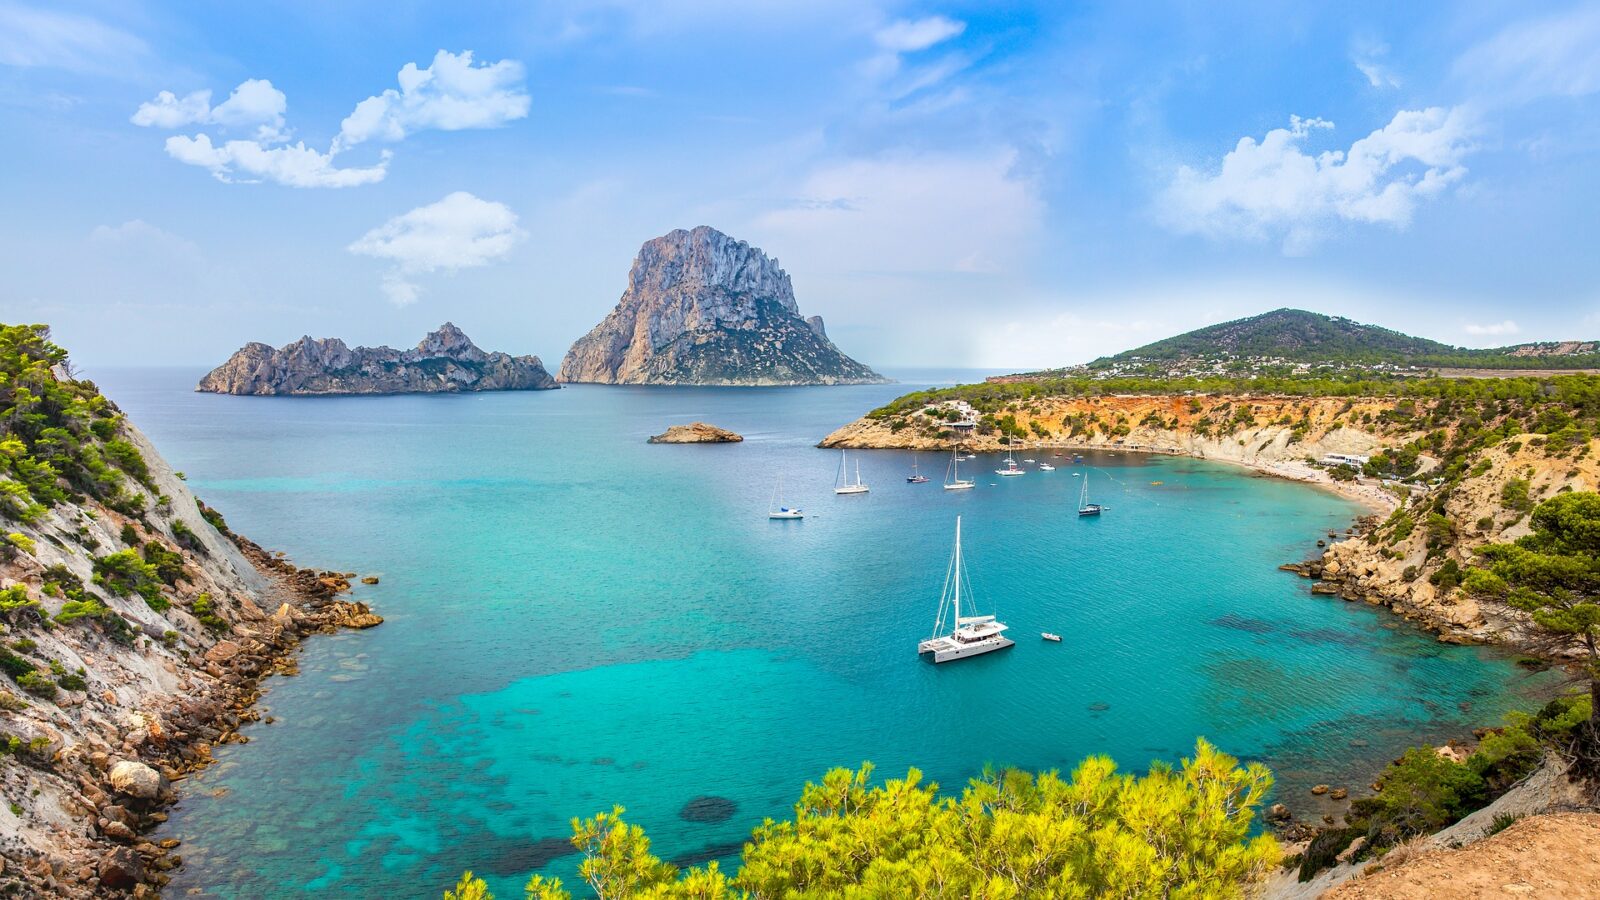 turquoise ocean cove in ibiza, spain with boats and an island in the background